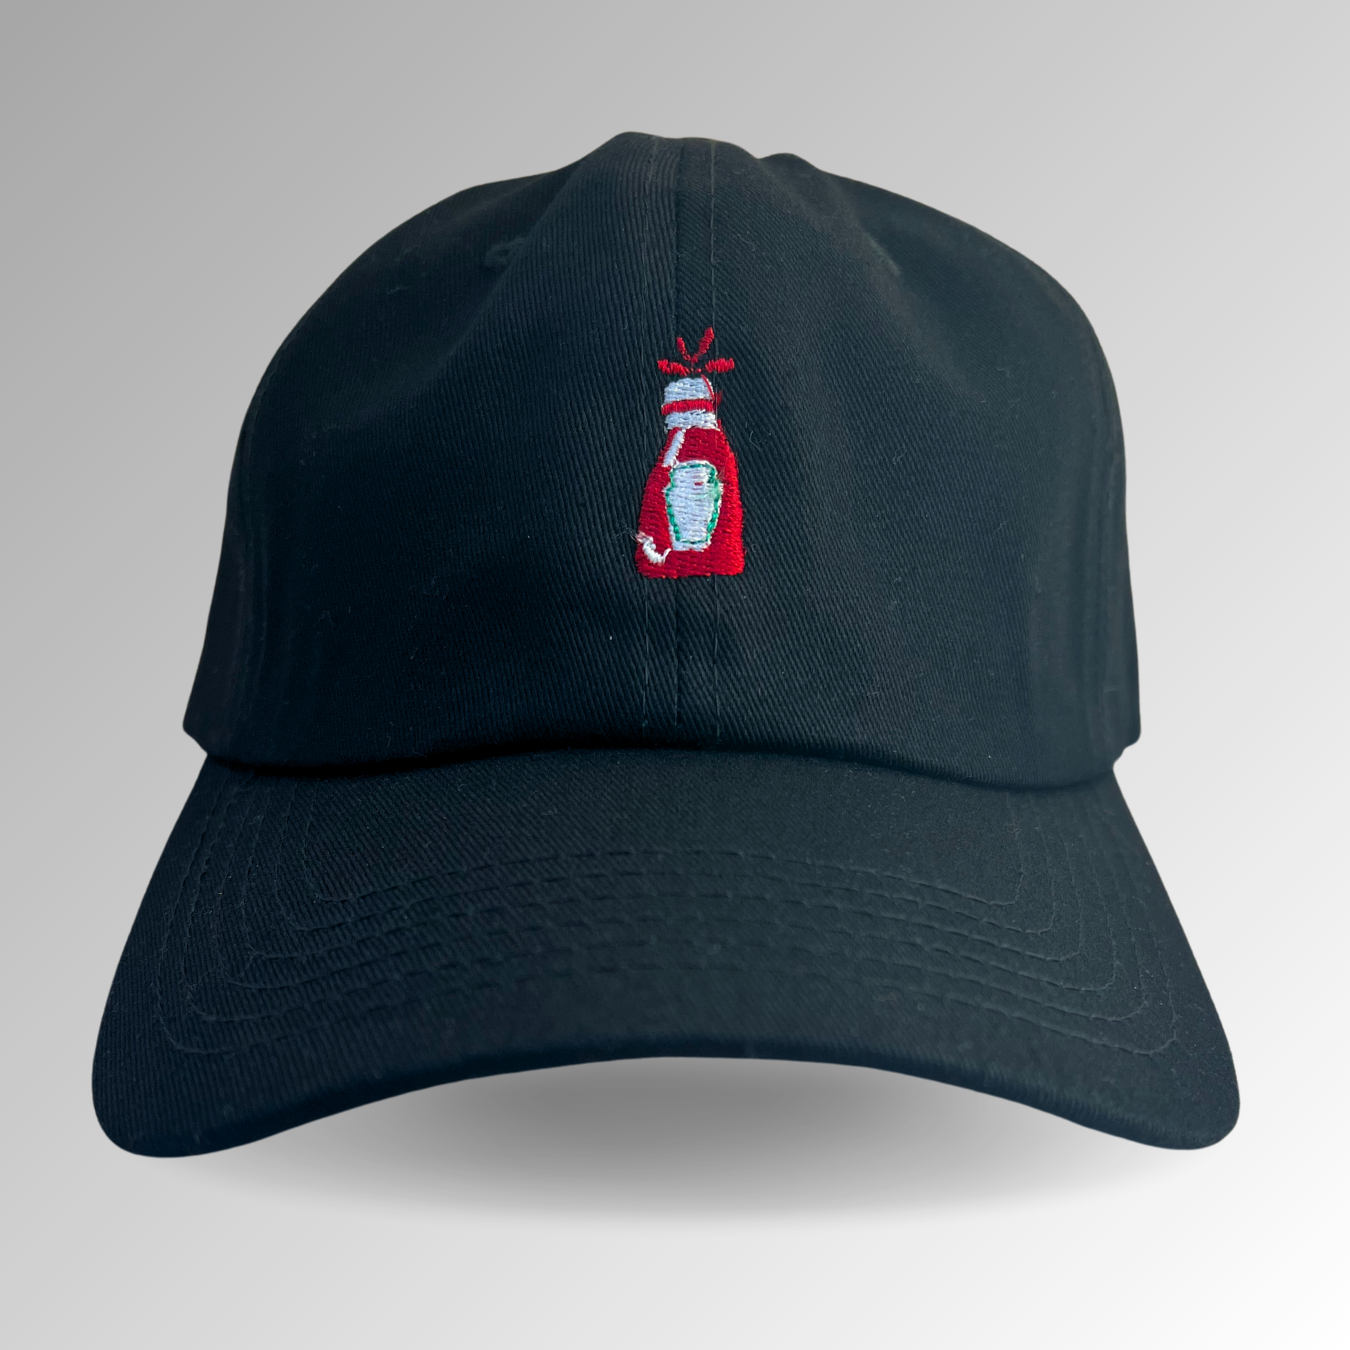 Ketchup Bottle Hat / Funny Embroidered Hats / Dad Hats